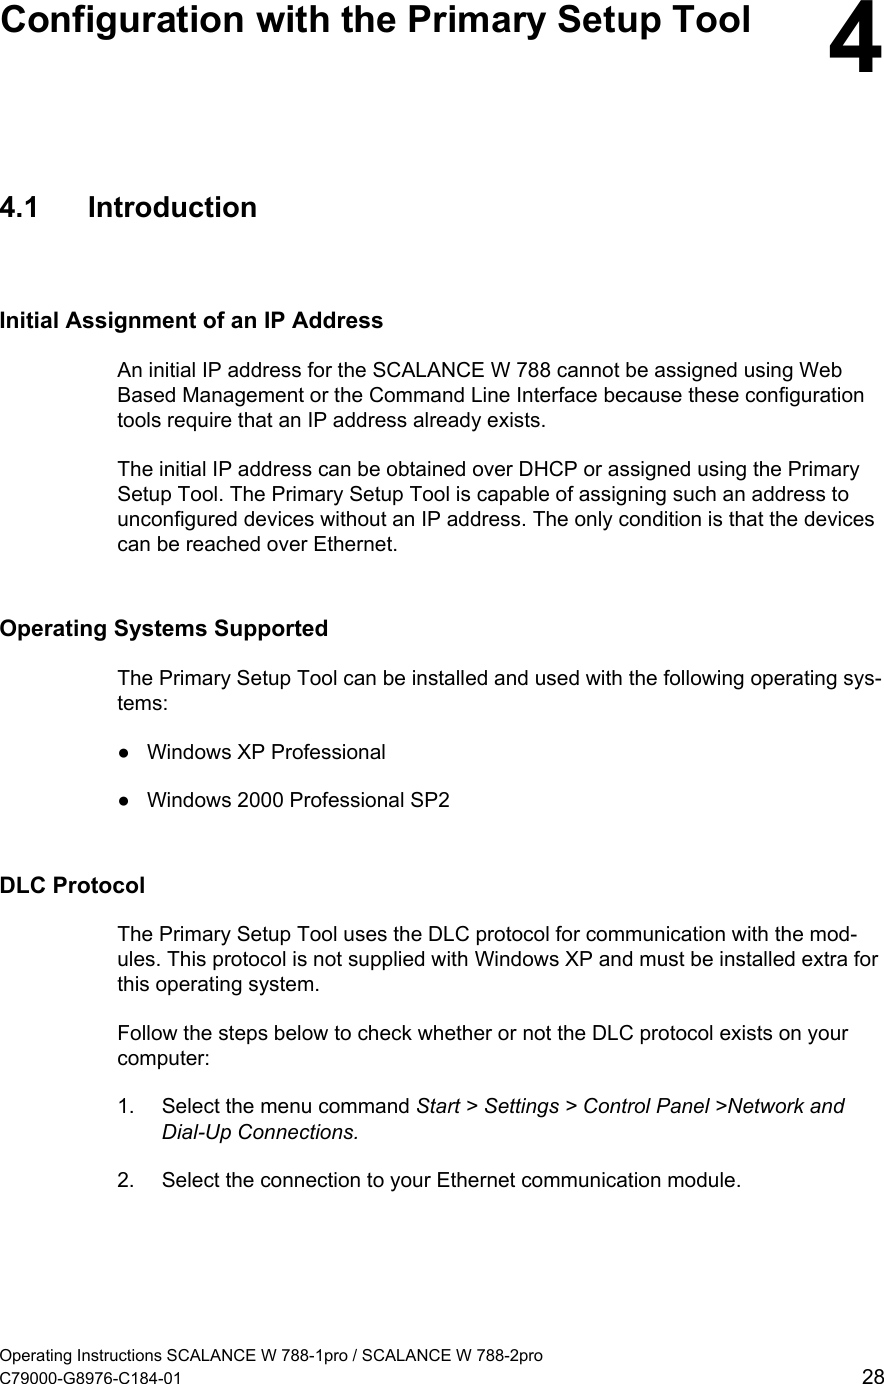   Configuration with the Primary Setup Tool  4 4.1 Introduction Initial Assignment of an IP Address An initial IP address for the SCALANCE W 788 cannot be assigned using Web Based Management or the Command Line Interface because these configuration tools require that an IP address already exists. The initial IP address can be obtained over DHCP or assigned using the Primary Setup Tool. The Primary Setup Tool is capable of assigning such an address to unconfigured devices without an IP address. The only condition is that the devices can be reached over Ethernet. Operating Systems Supported The Primary Setup Tool can be installed and used with the following operating sys-tems: ●  Windows XP Professional ●  Windows 2000 Professional SP2 DLC Protocol The Primary Setup Tool uses the DLC protocol for communication with the mod-ules. This protocol is not supplied with Windows XP and must be installed extra for this operating system. Follow the steps below to check whether or not the DLC protocol exists on your computer: 1.  Select the menu command Start &gt; Settings &gt; Control Panel &gt;Network and Dial-Up Connections. 2.  Select the connection to your Ethernet communication module. Operating Instructions SCALANCE W 788-1pro / SCALANCE W 788-2pro C79000-G8976-C184-01  28 